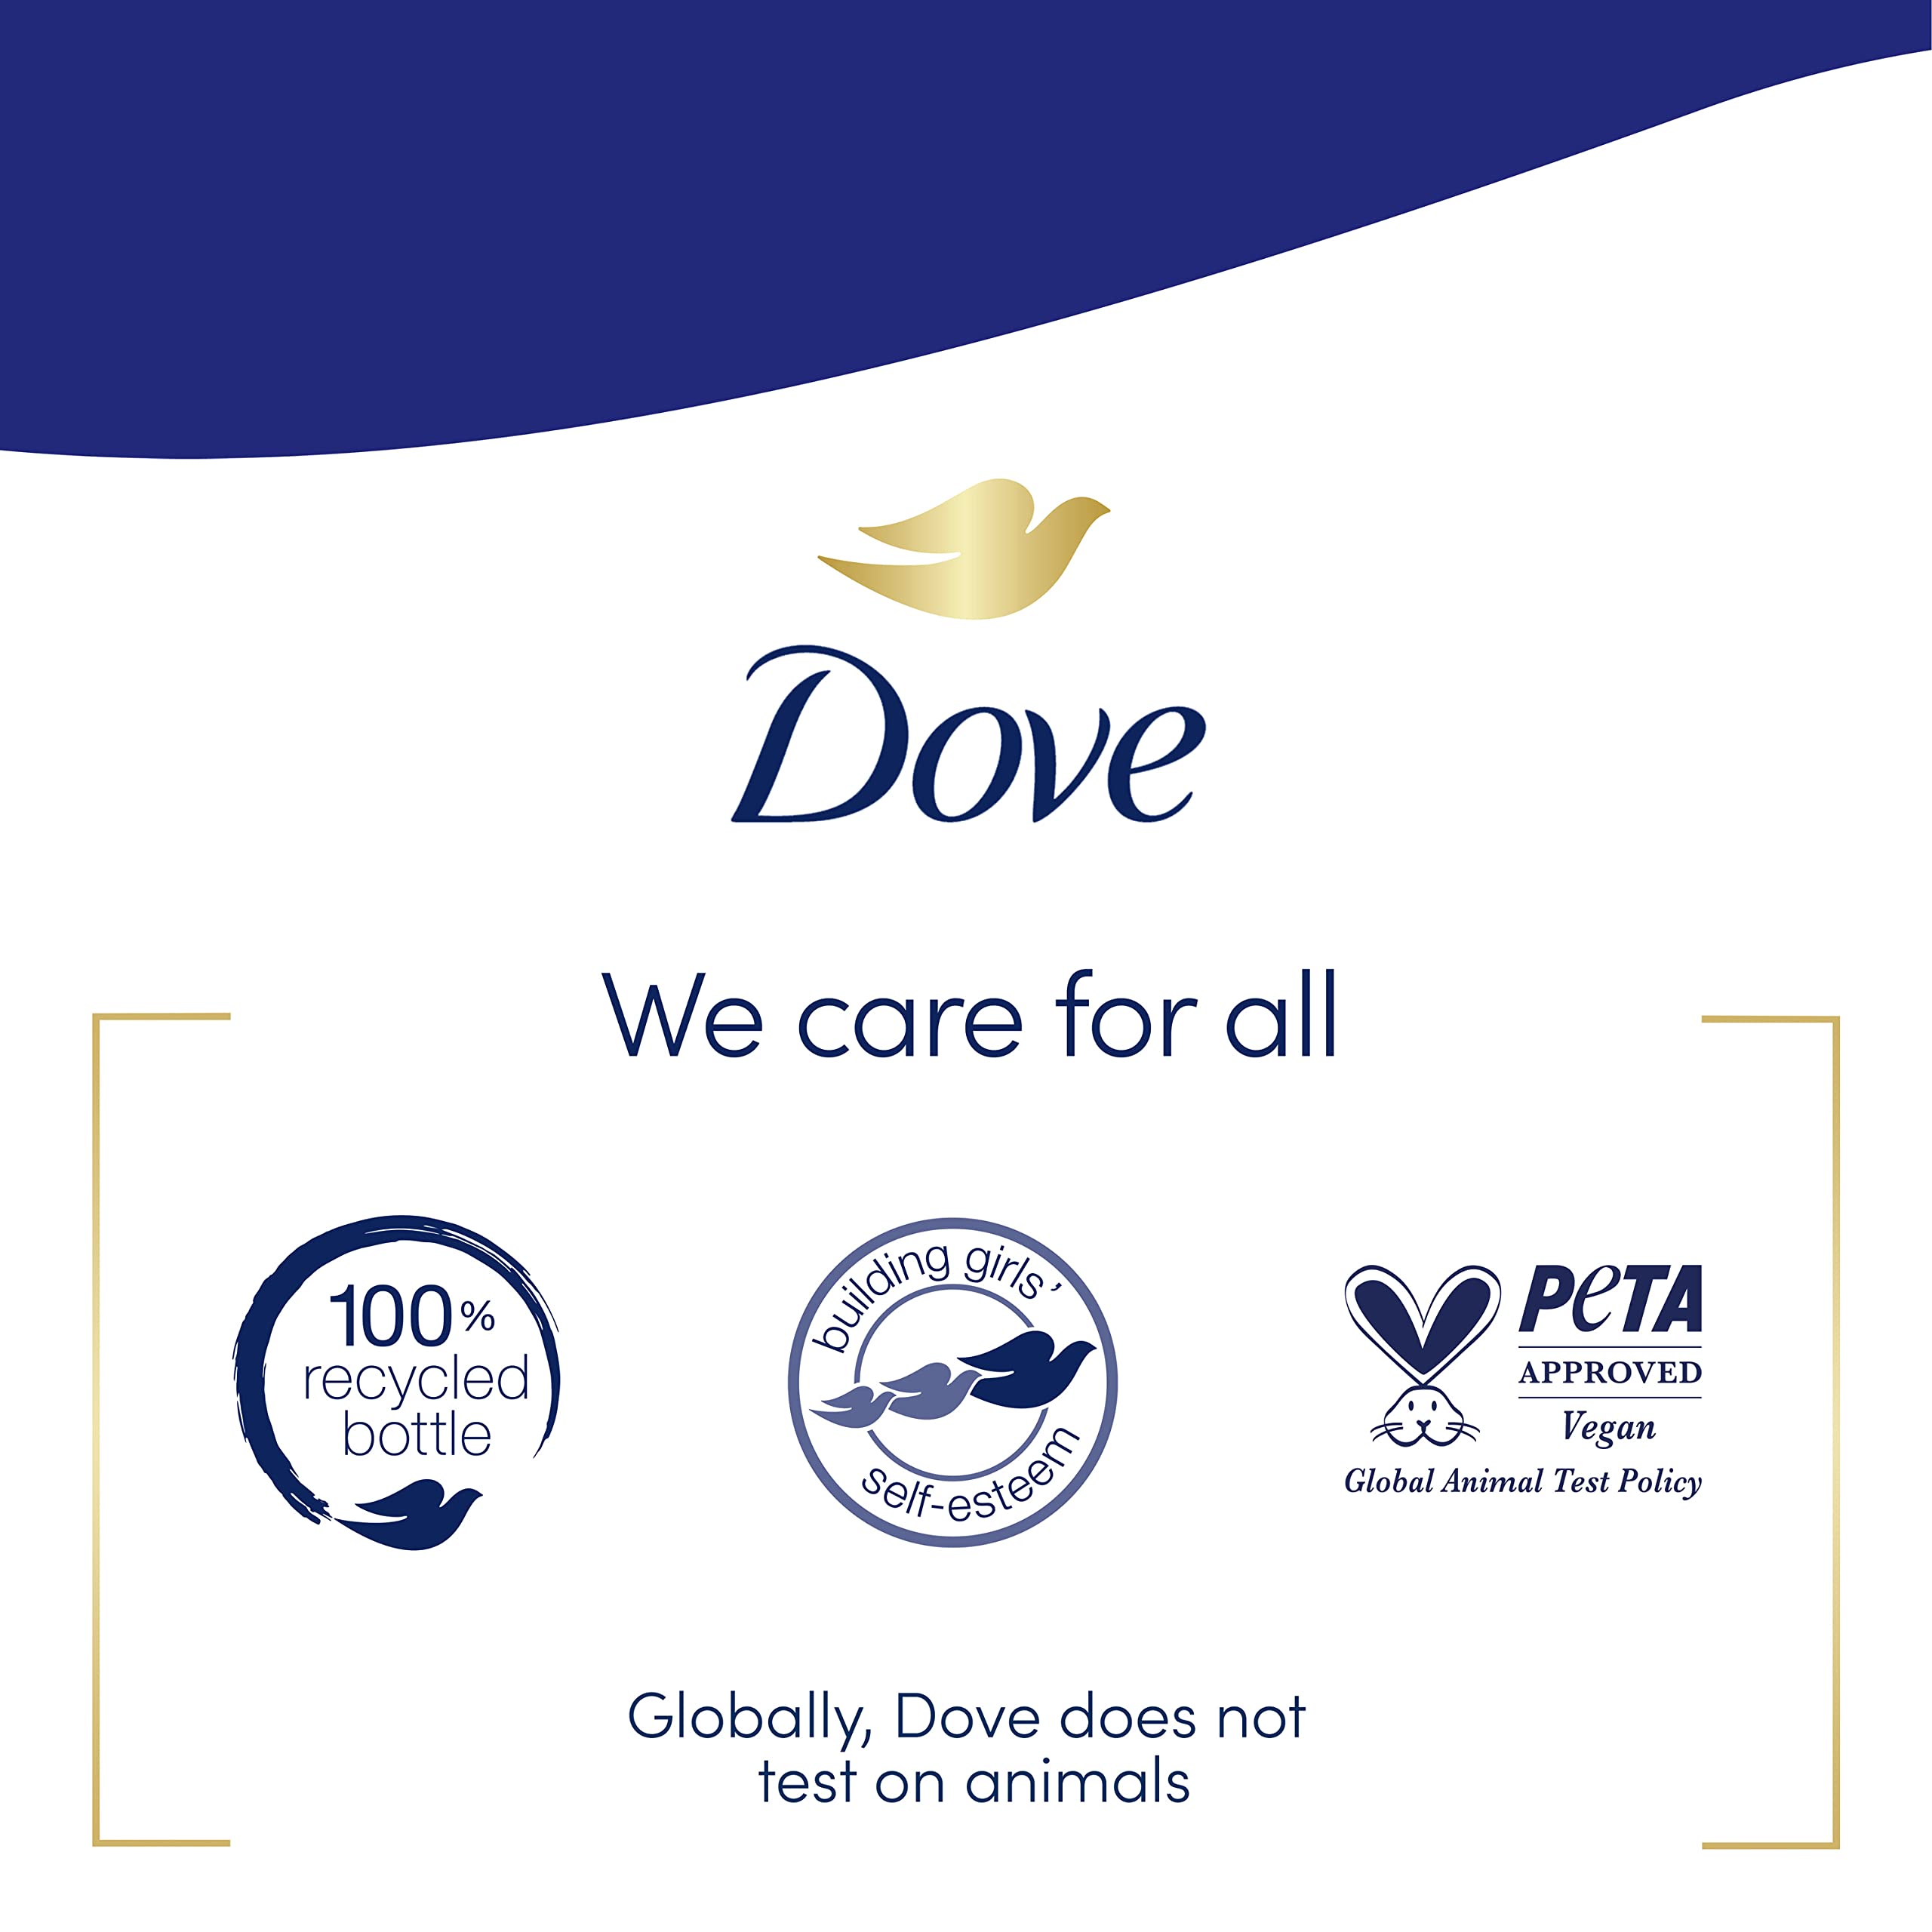 Dove Advanced Care Hand Wash Deep Moisture Pack of 3 for Soft, Smooth Skin More Moisturizers Than The Leading Ordinary Hand Soap, 34 oz